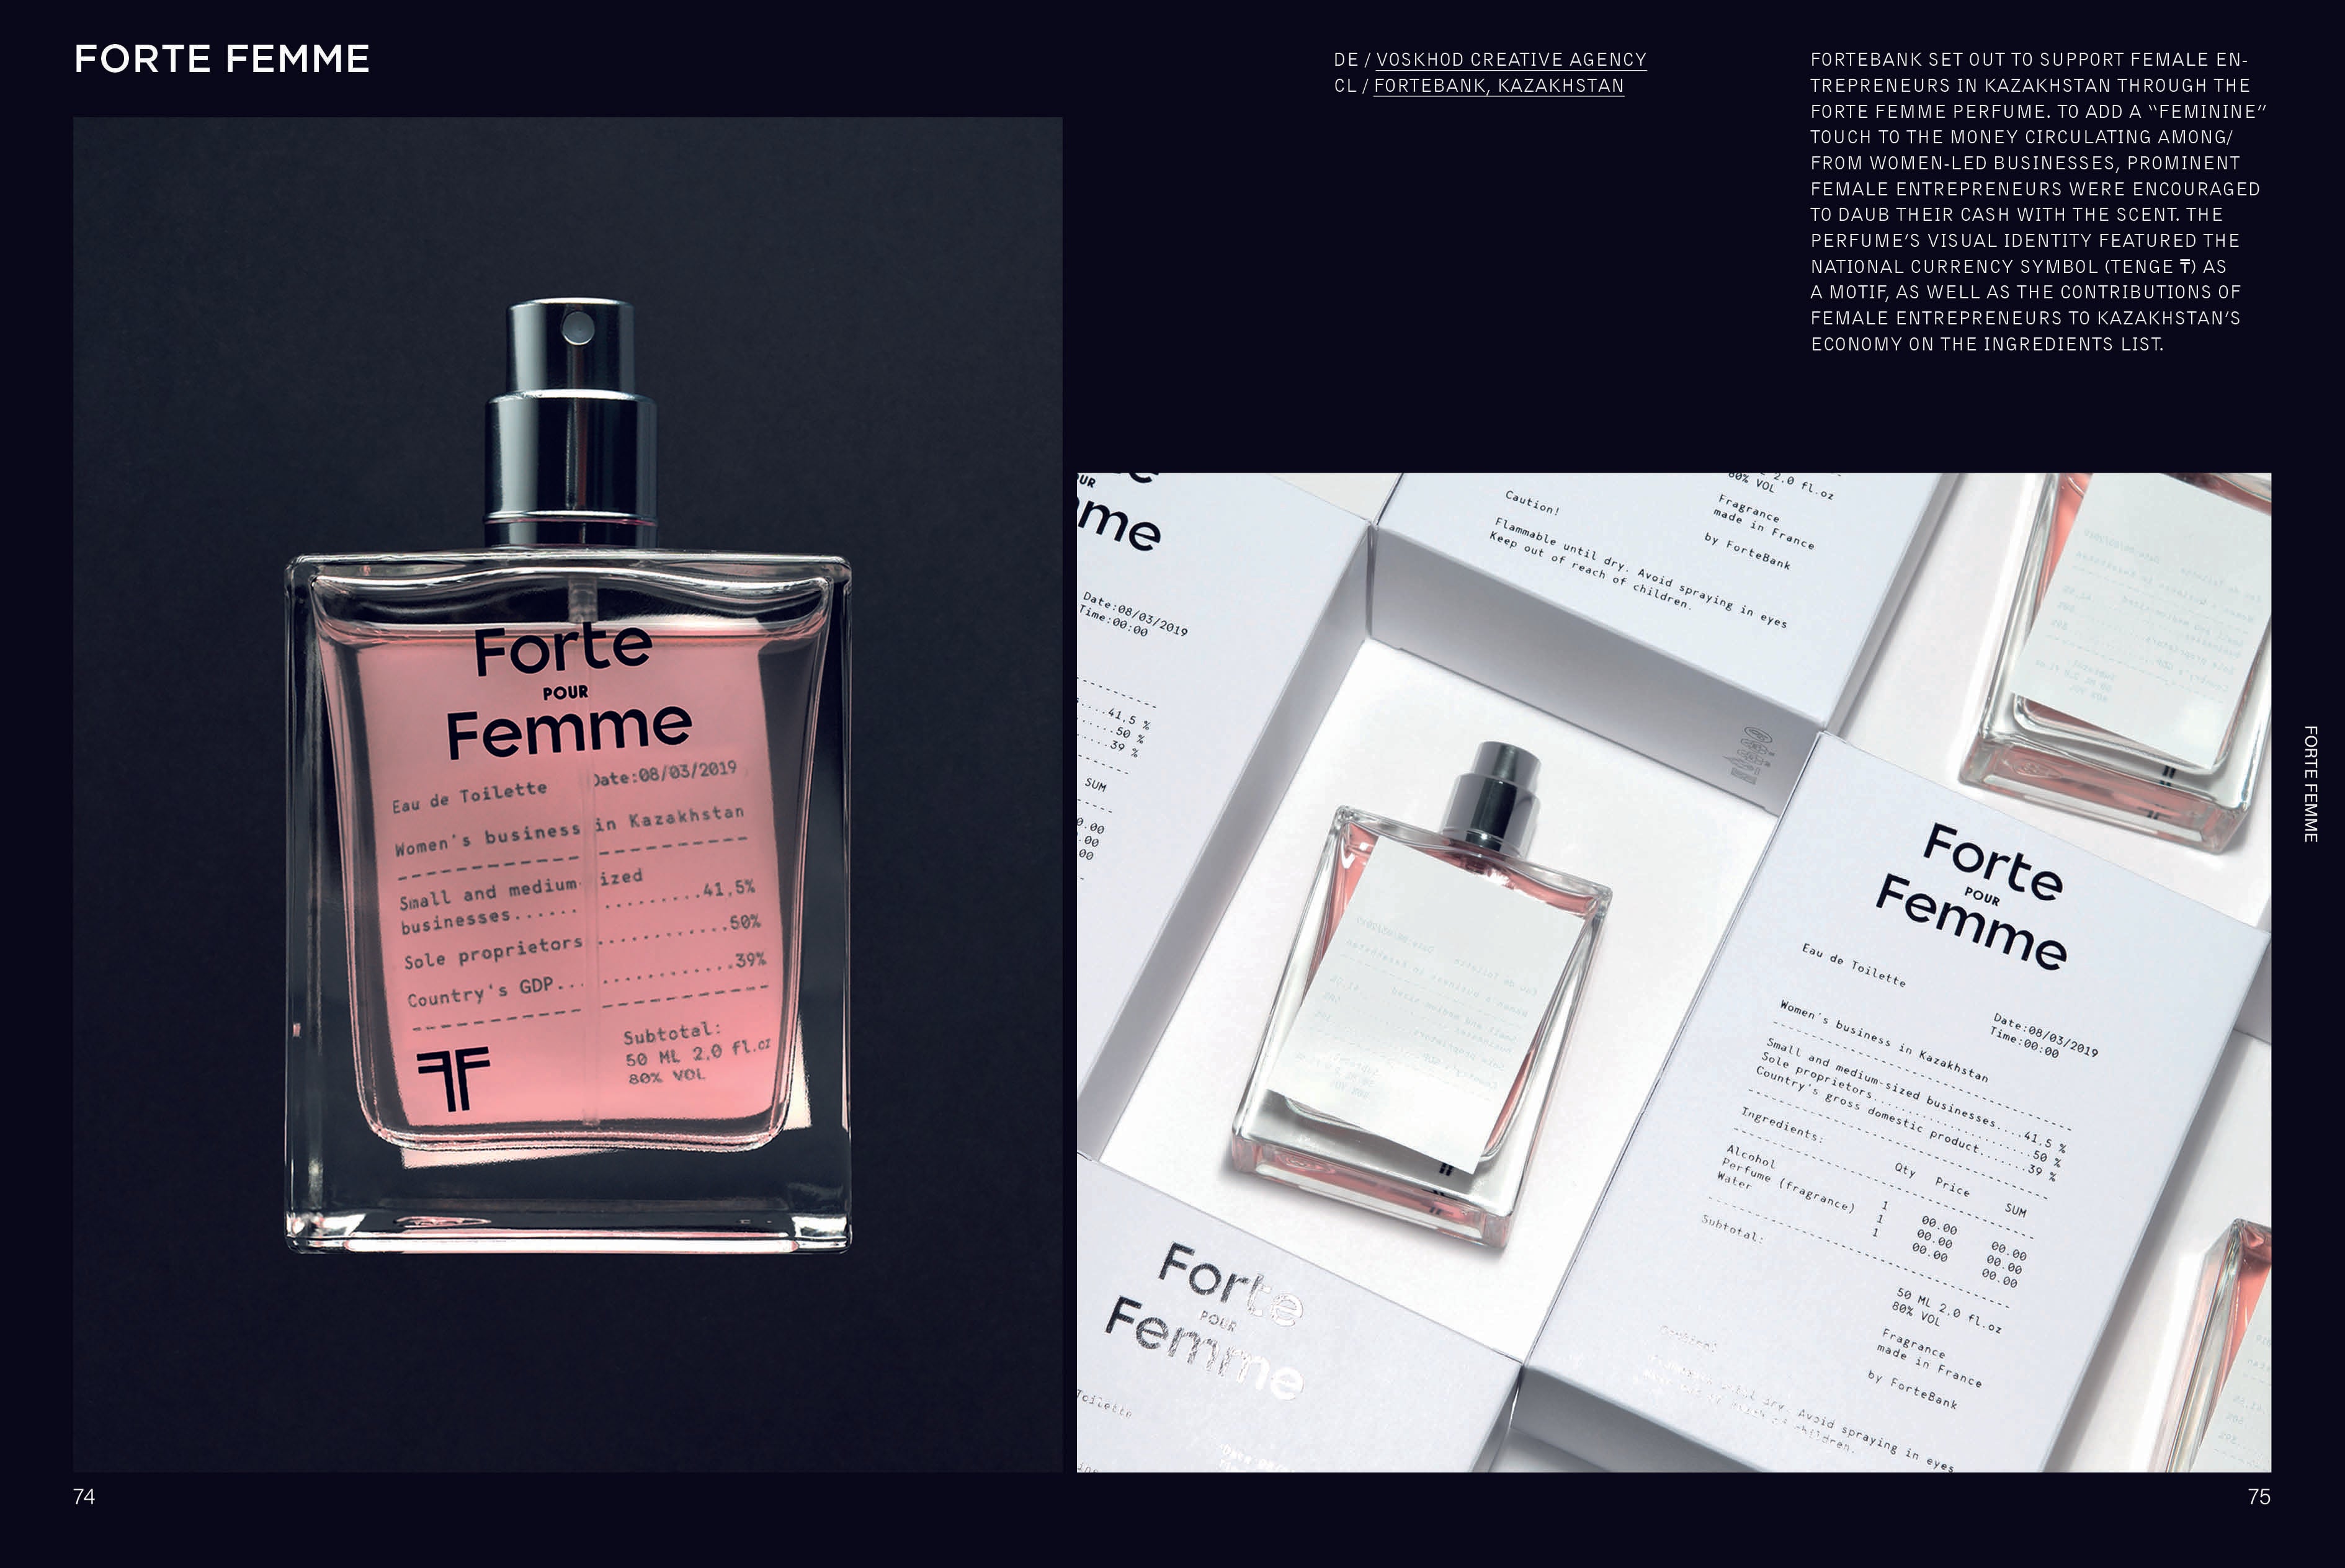 Packaged for Life: Scent